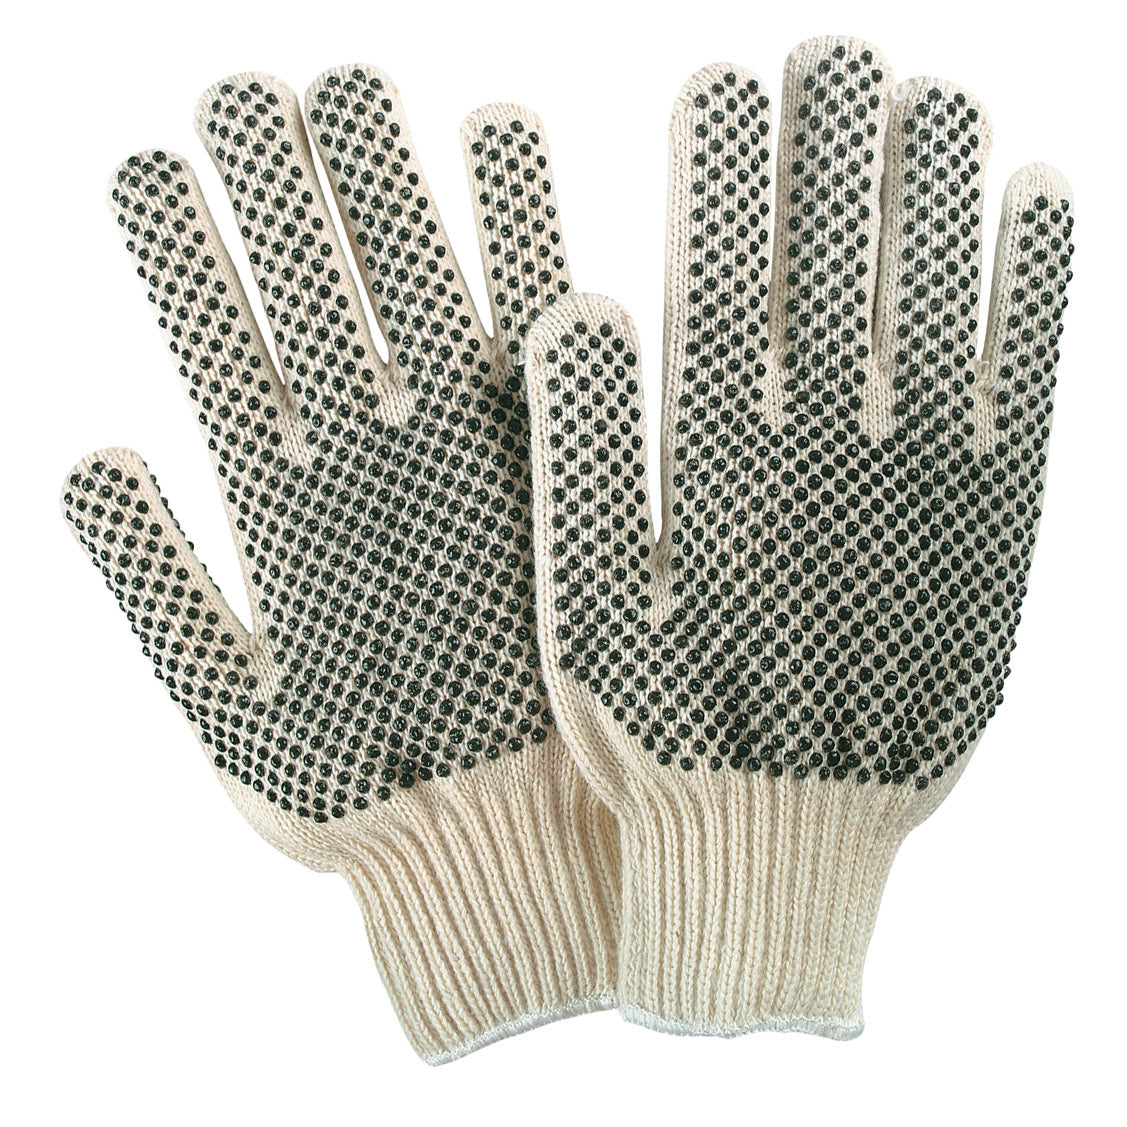 Memphis Two Sided PVC Dotted String Knit Gloves (12 per Box), 9668-L